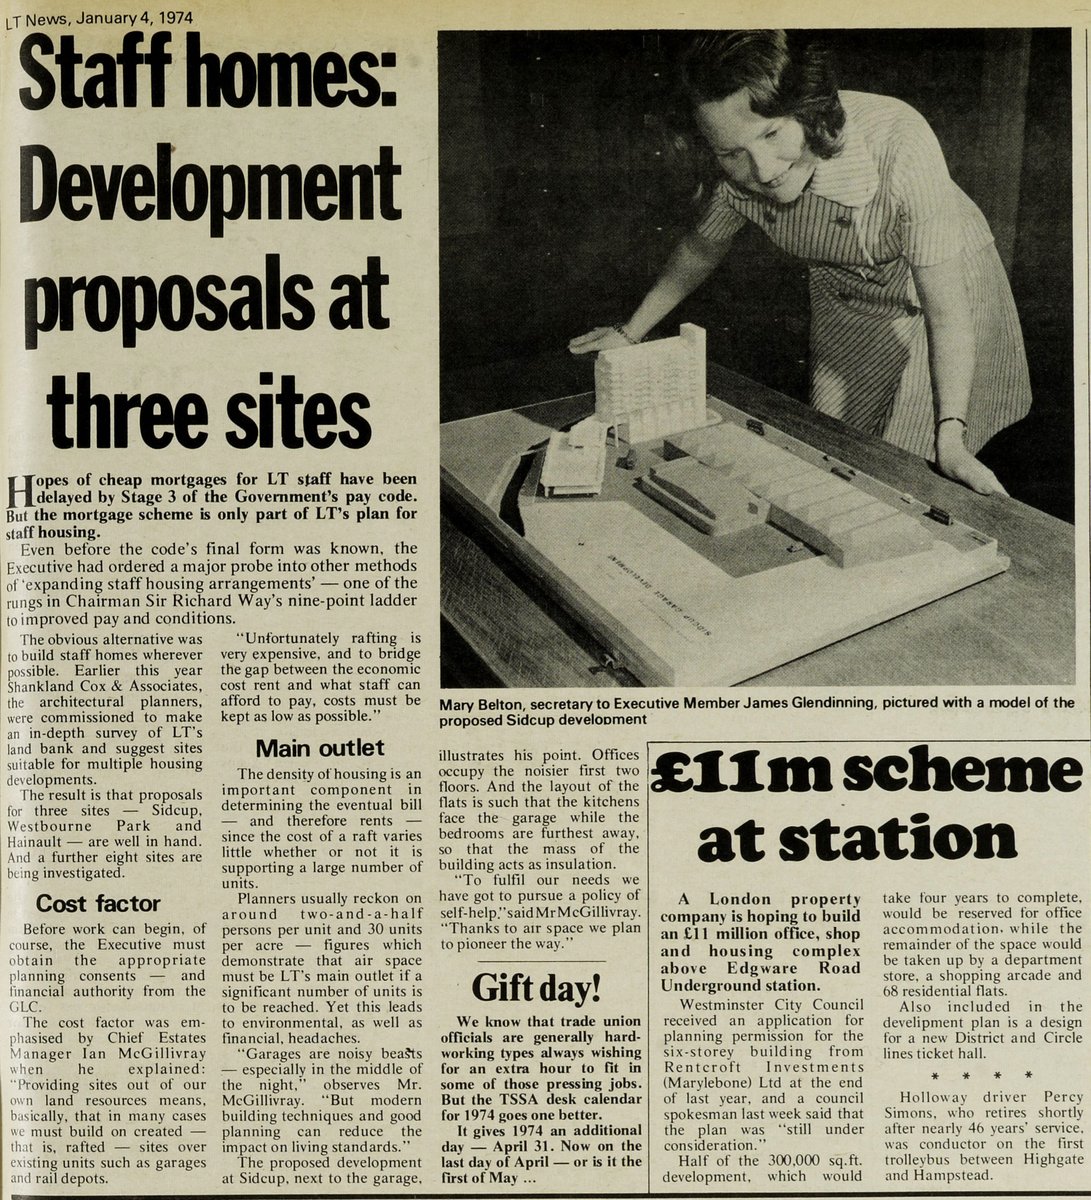 #London #Transport (#LT) News (No. 19 - January 4 1974) clipping:
LT planned to build homes for their members of staff.

At present, #TfL currently has their own property company named 'Places for London', aiming to create 20,000 new homes.
placesforlondon.co.uk